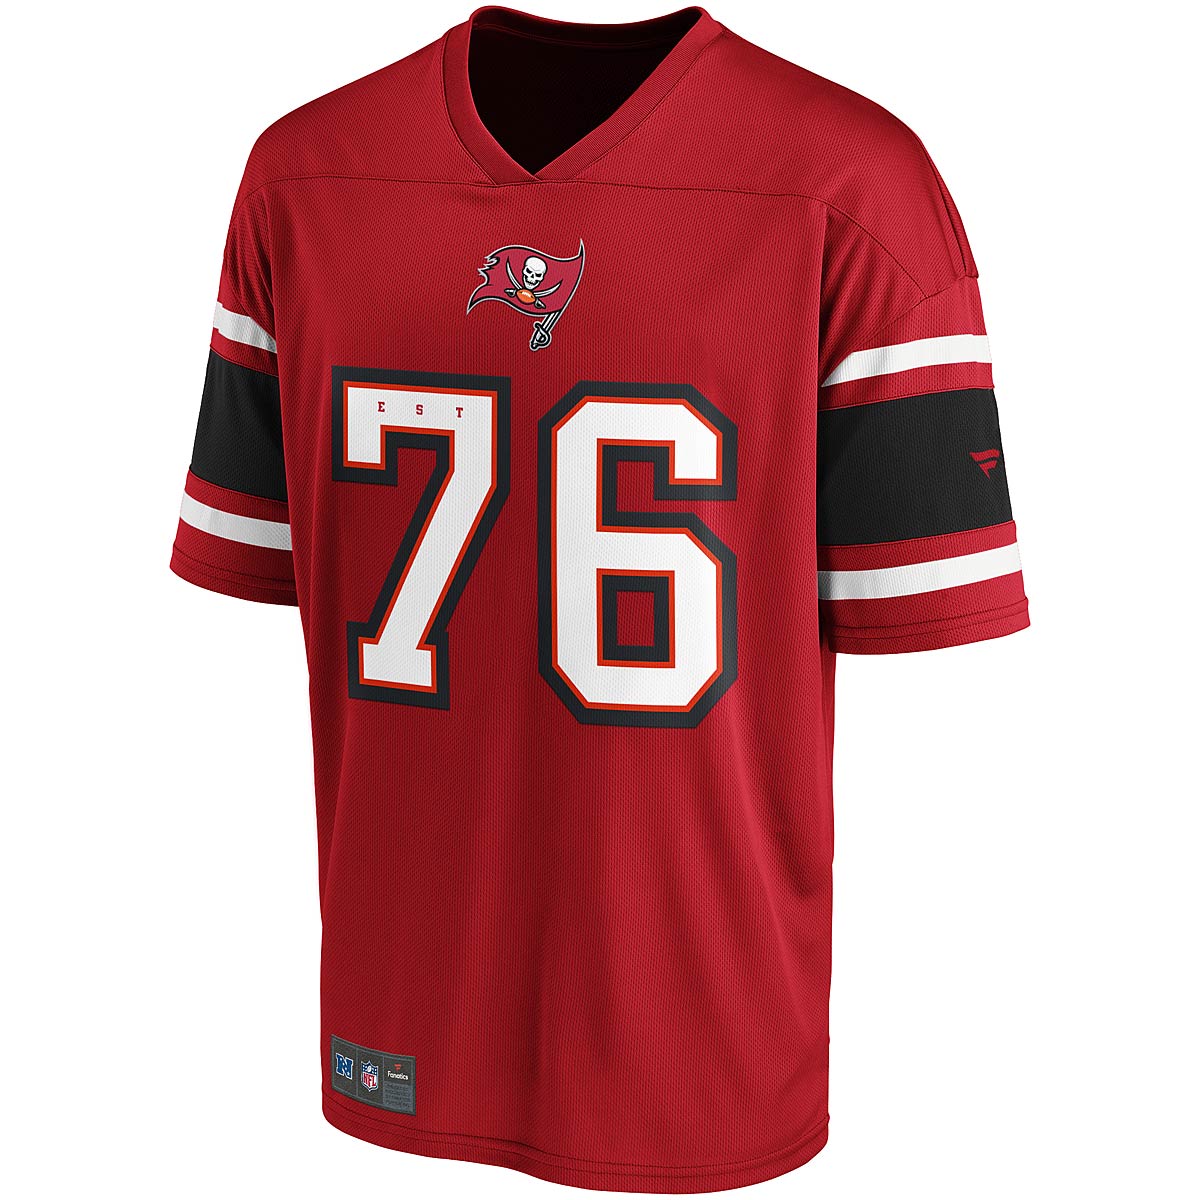 Fanatics Nfl Tampa Bay Buccaneers Franchise Mesh Jersey, Red